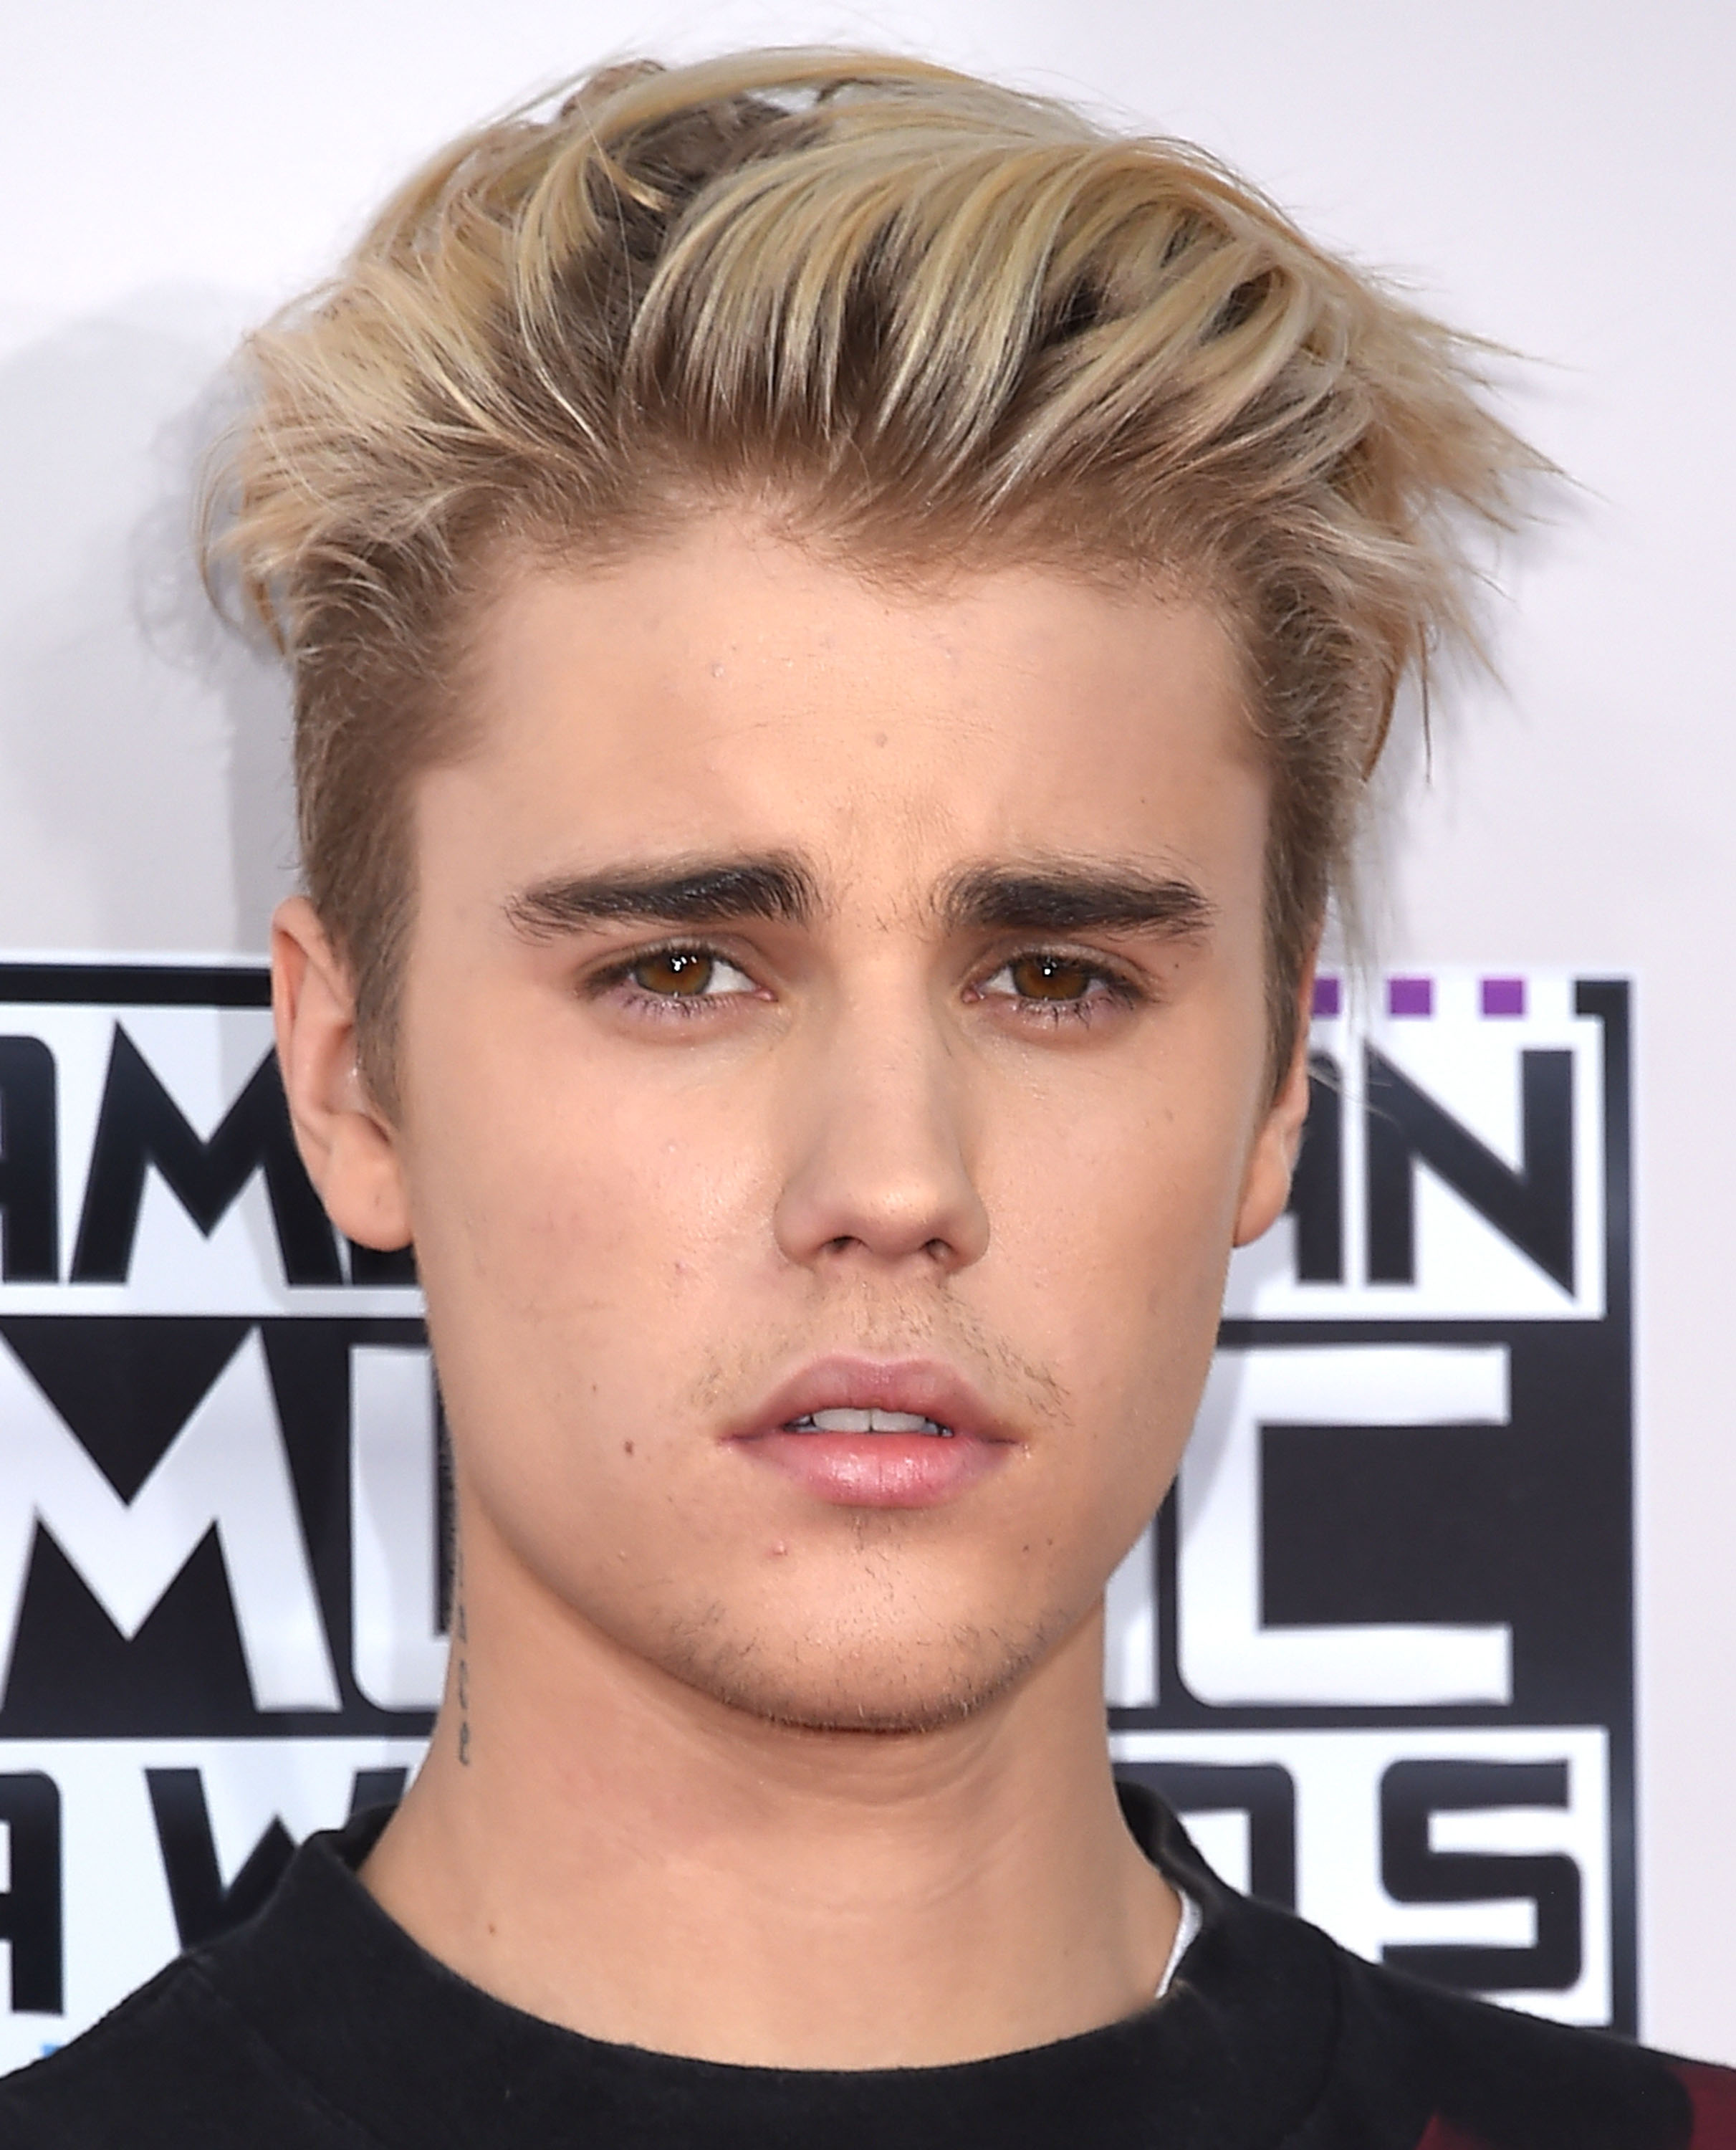 27 Crazy Justin Bieber Haircut Styles throughout the Years [2023 update] |  Mens hairstyles, Mens hairstyles short, Haircuts for men